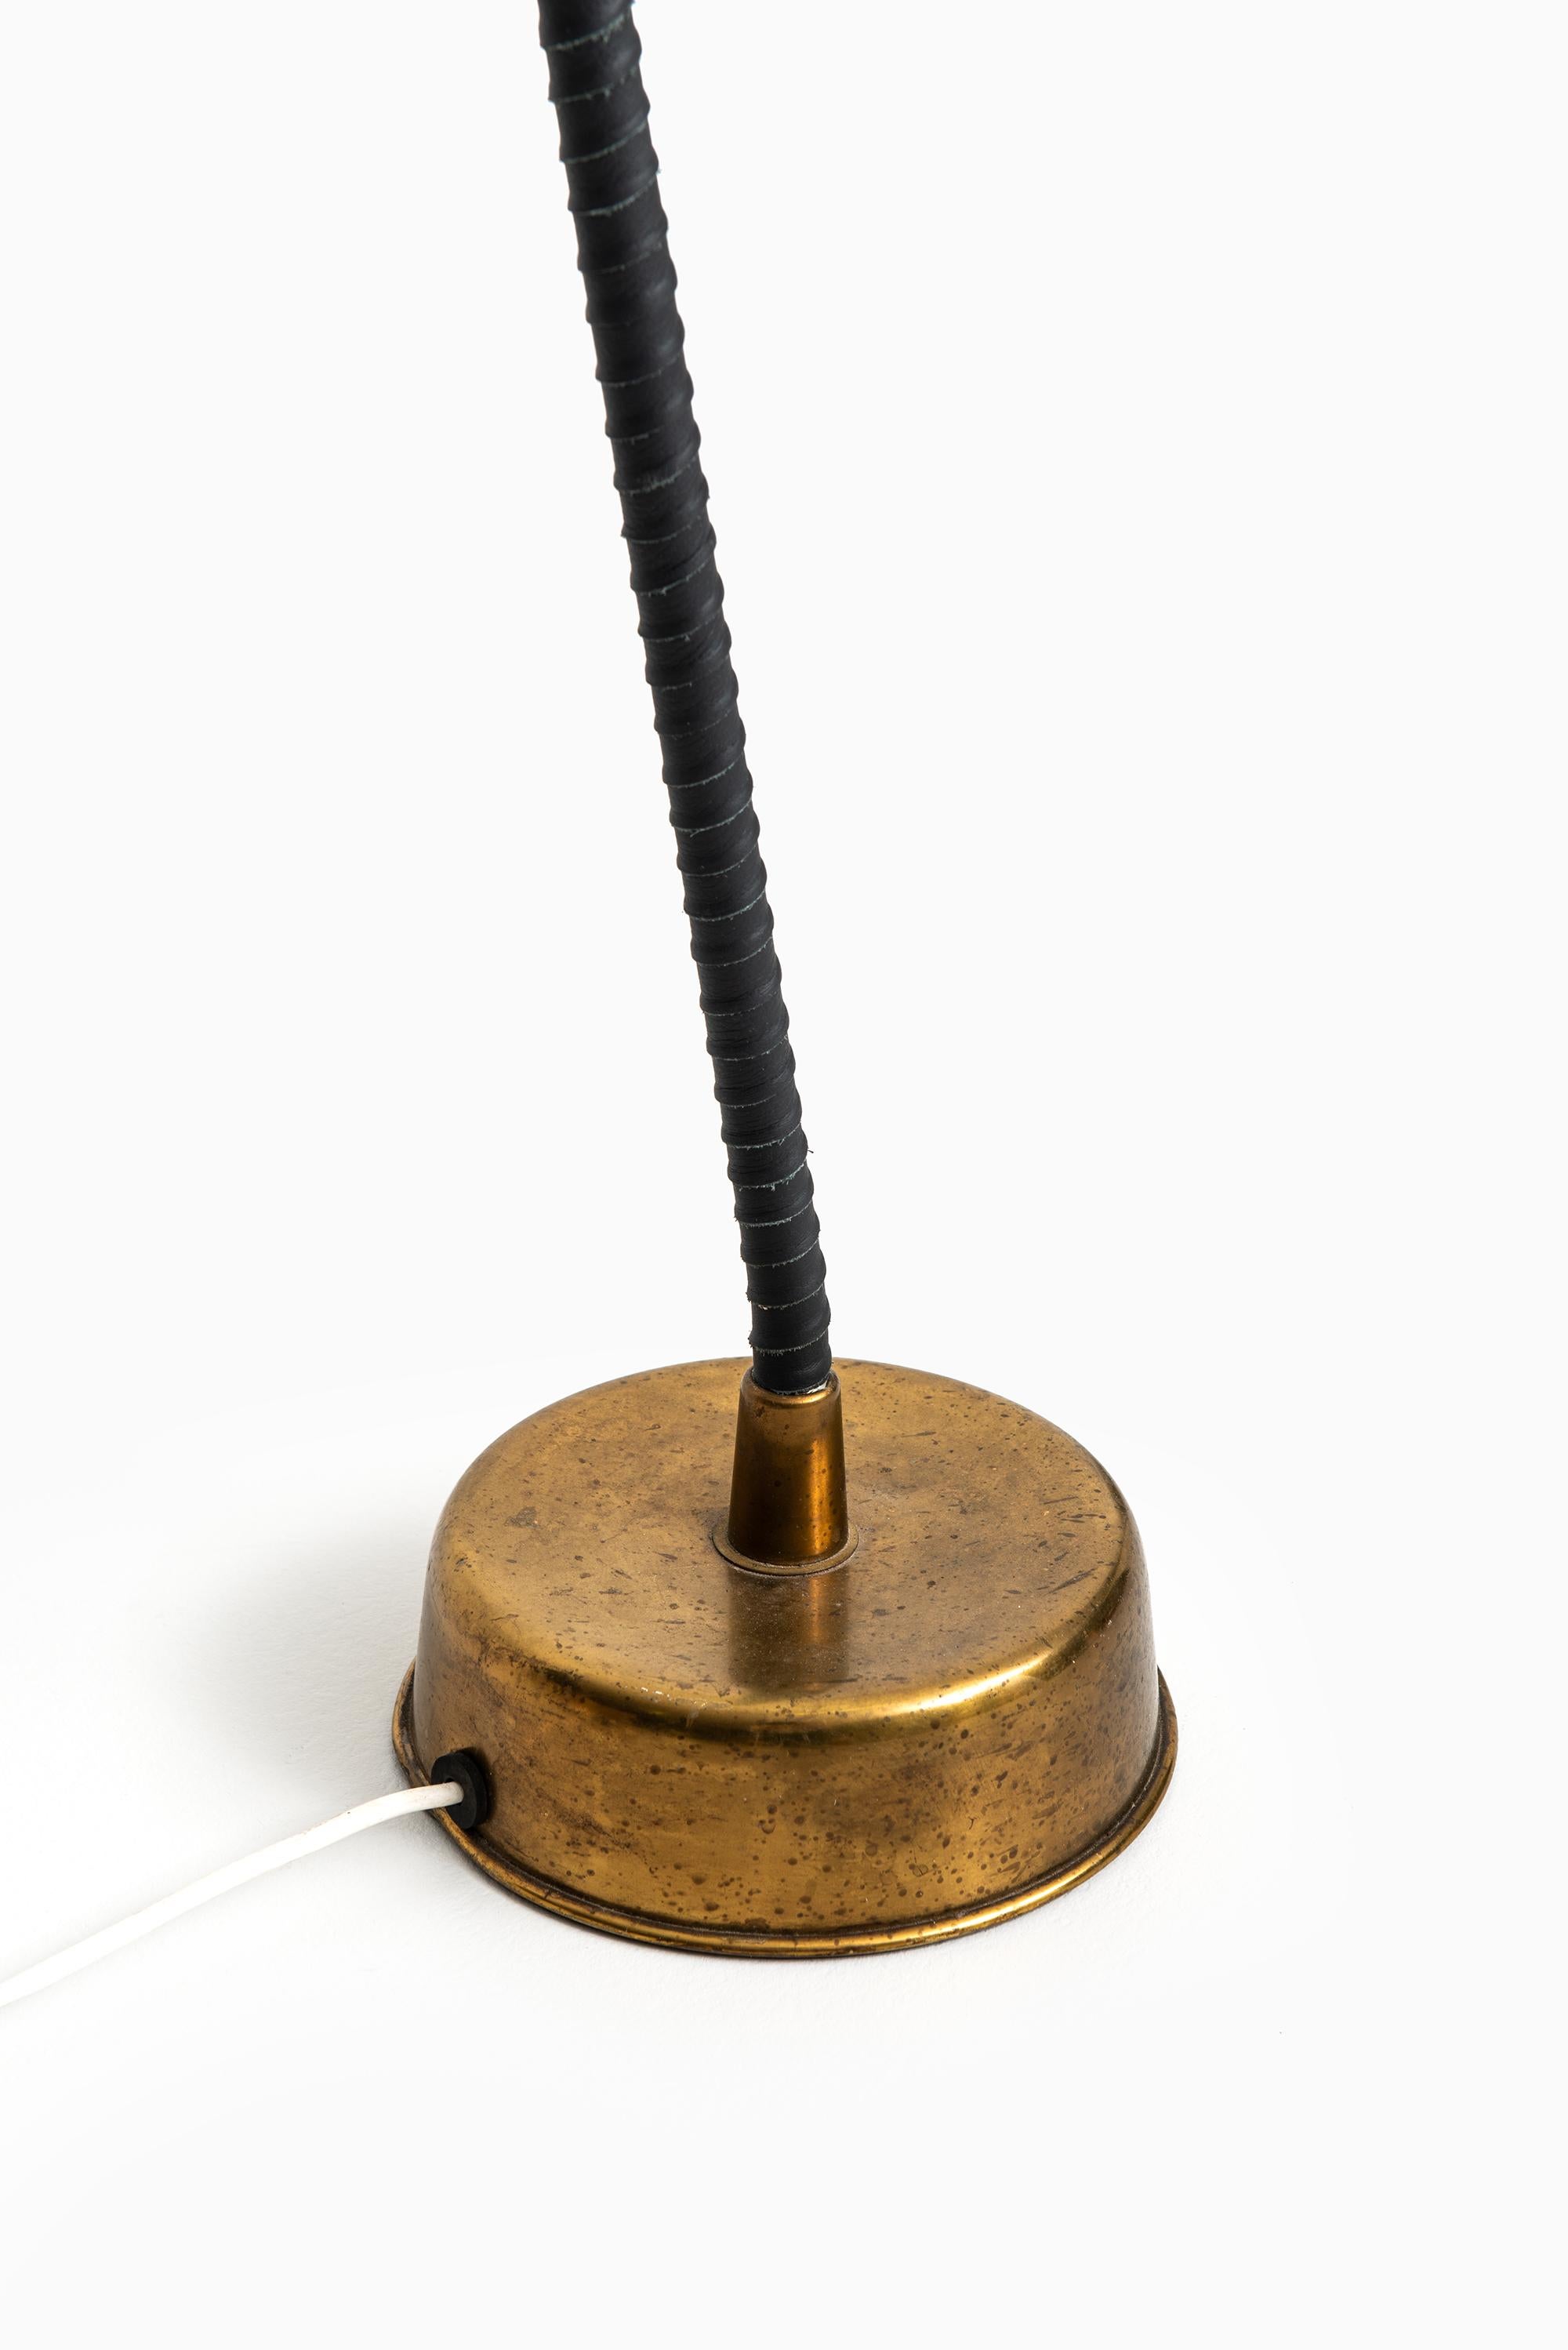 Rare floor lamp designed by Lisa Johansson-Pape. Produced by Orno in Finland.